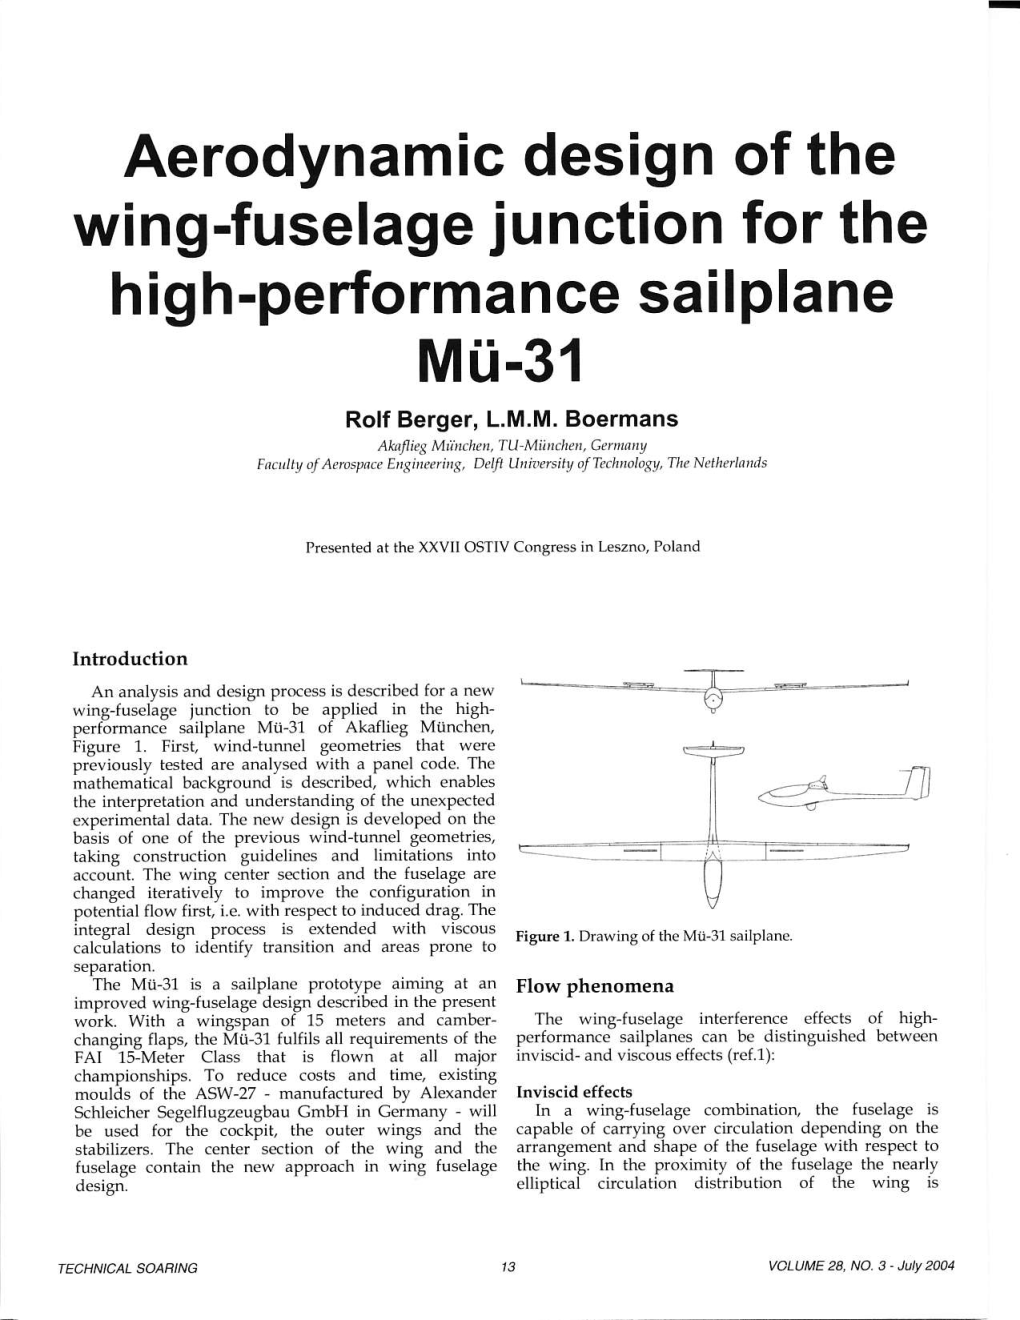 Wing-Fuselage Junction for the Aerodynamic Design of the H Igh